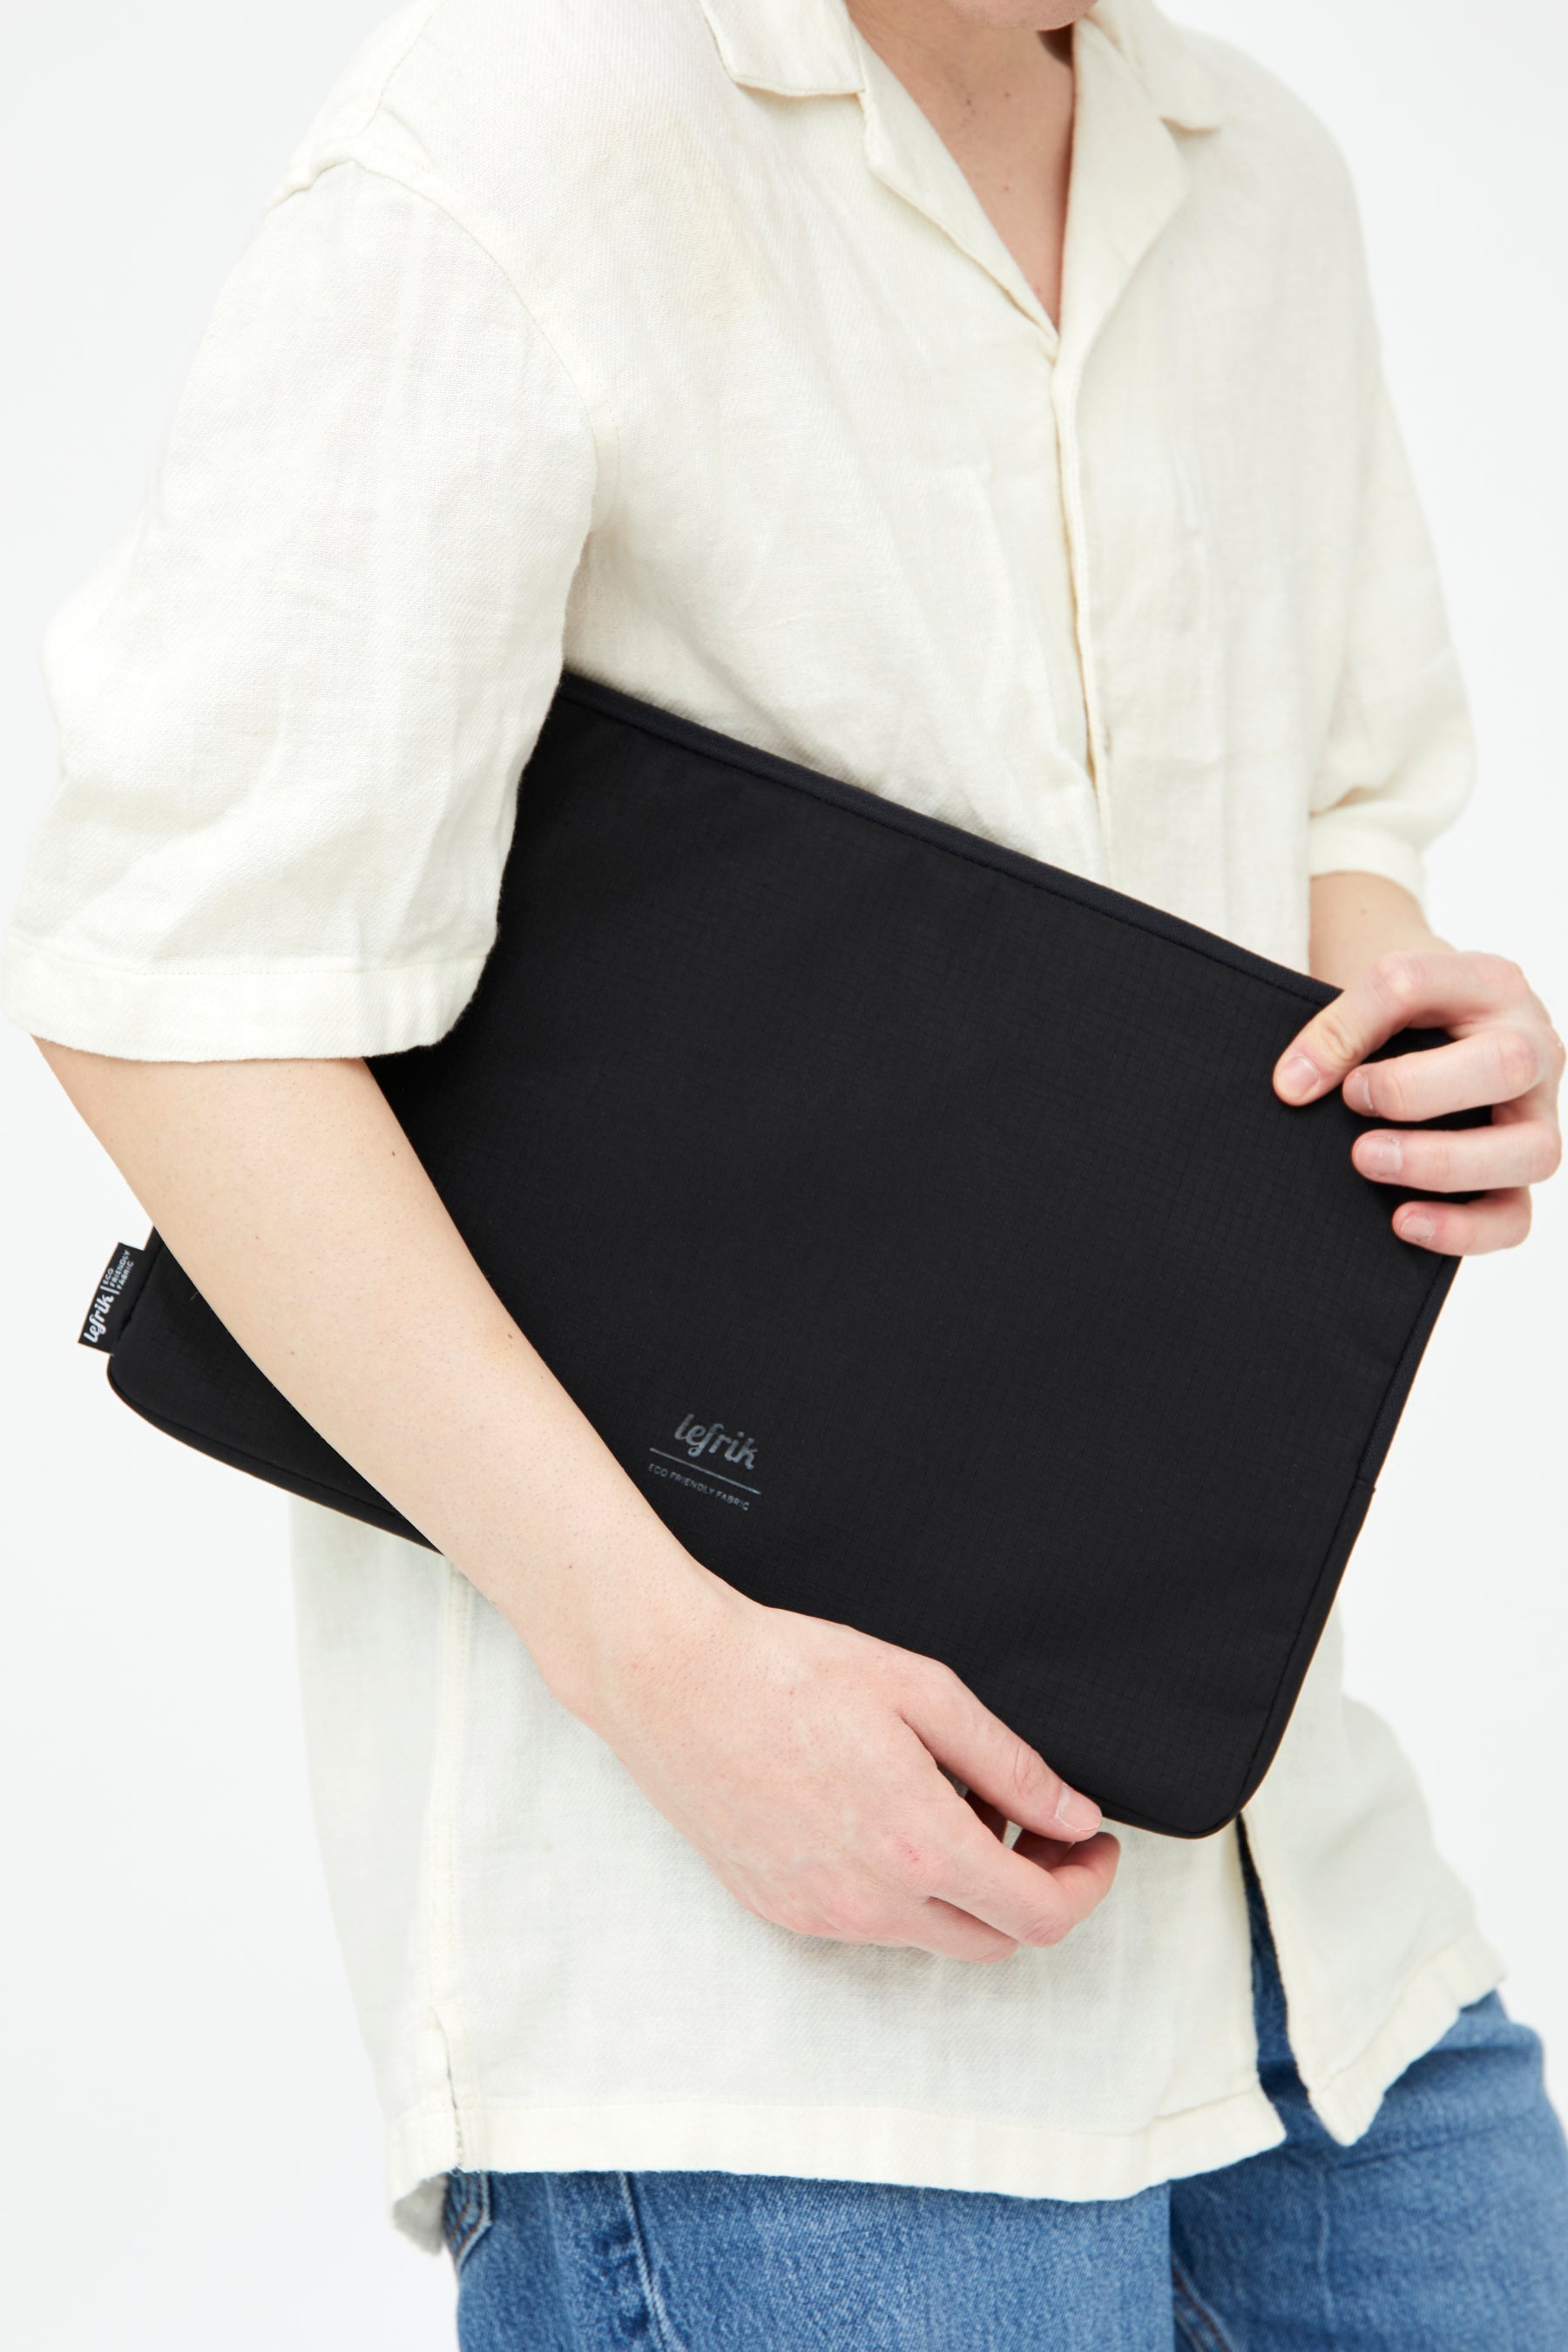 Black Vandra laptop bag made from recycled PET from Lefrik